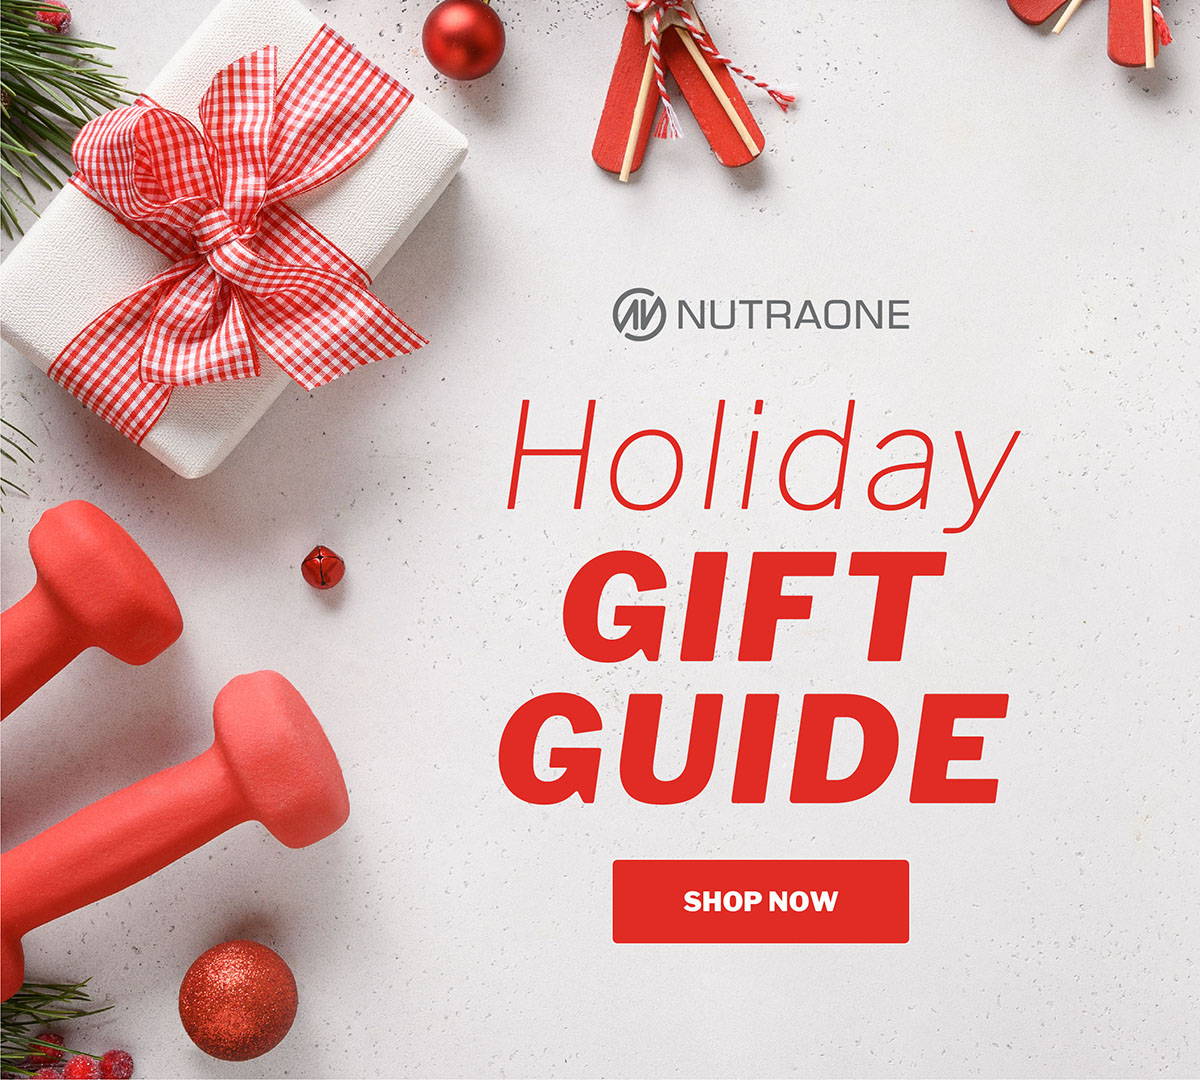 NutraOne Holiday Gift Guide